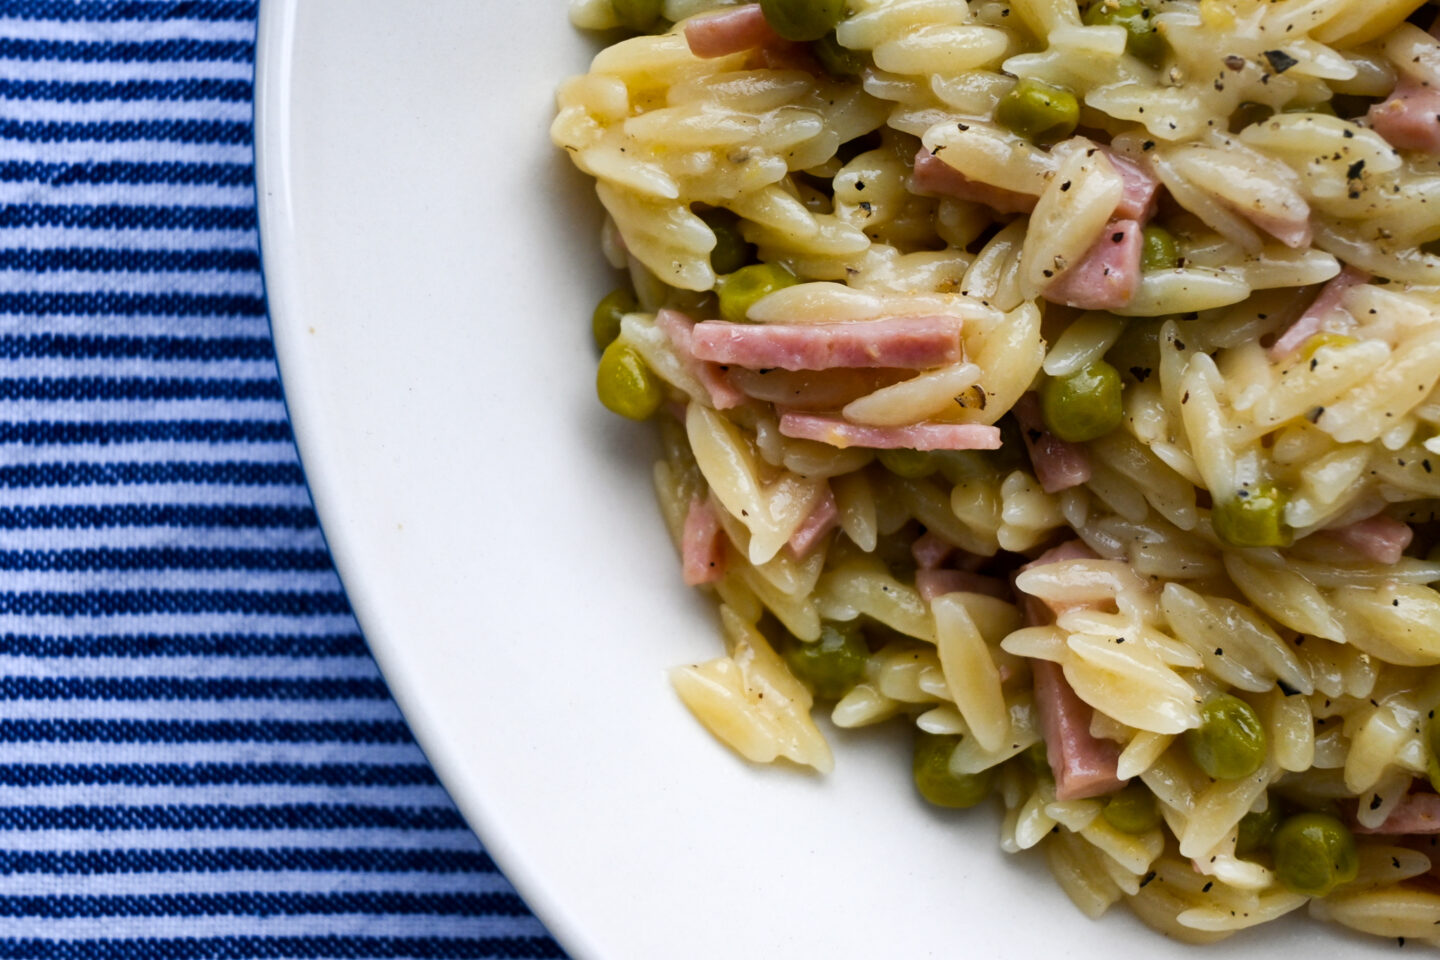 Corner of a plate of orzo, ham cubes & peas on a blue and white striped background